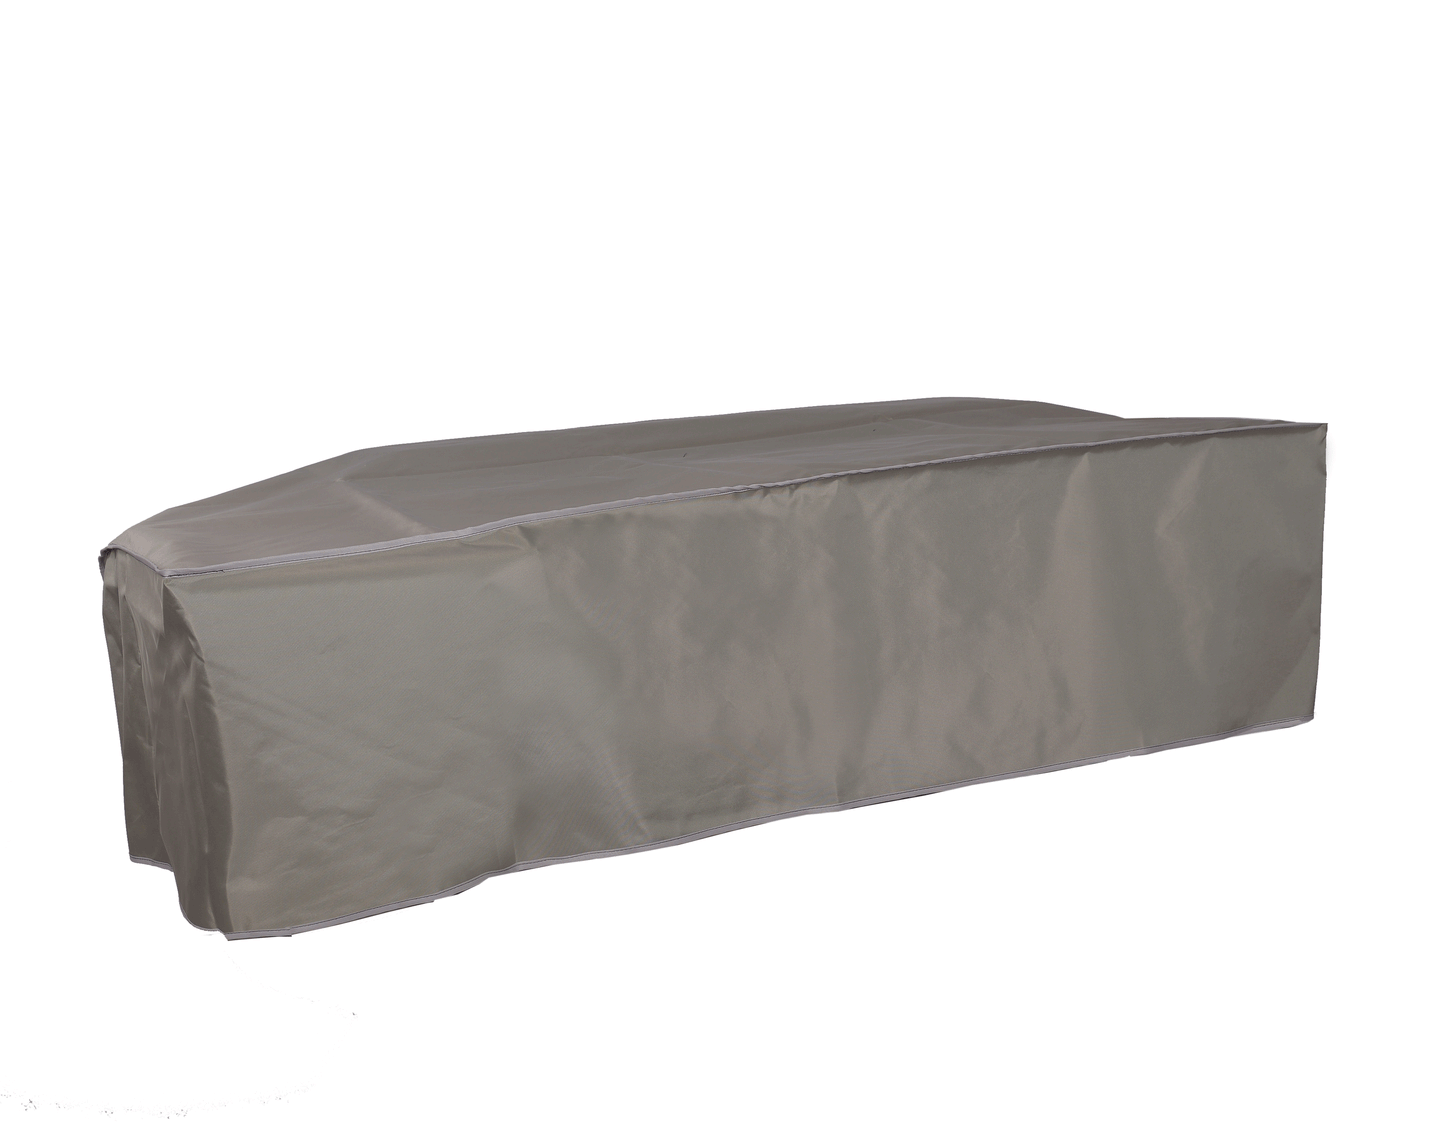 Perfect Dust Cover, Silver Gray Nylon Cover Compatible with GCC Jaguar V J5-61LX 24'' Vinyl Cutting Plotter, Anti-Static and Waterproof Dust Cover Dimensions 37.4''W x 19.1''D x 16.2''H by The Perfect Dust Cover LLC